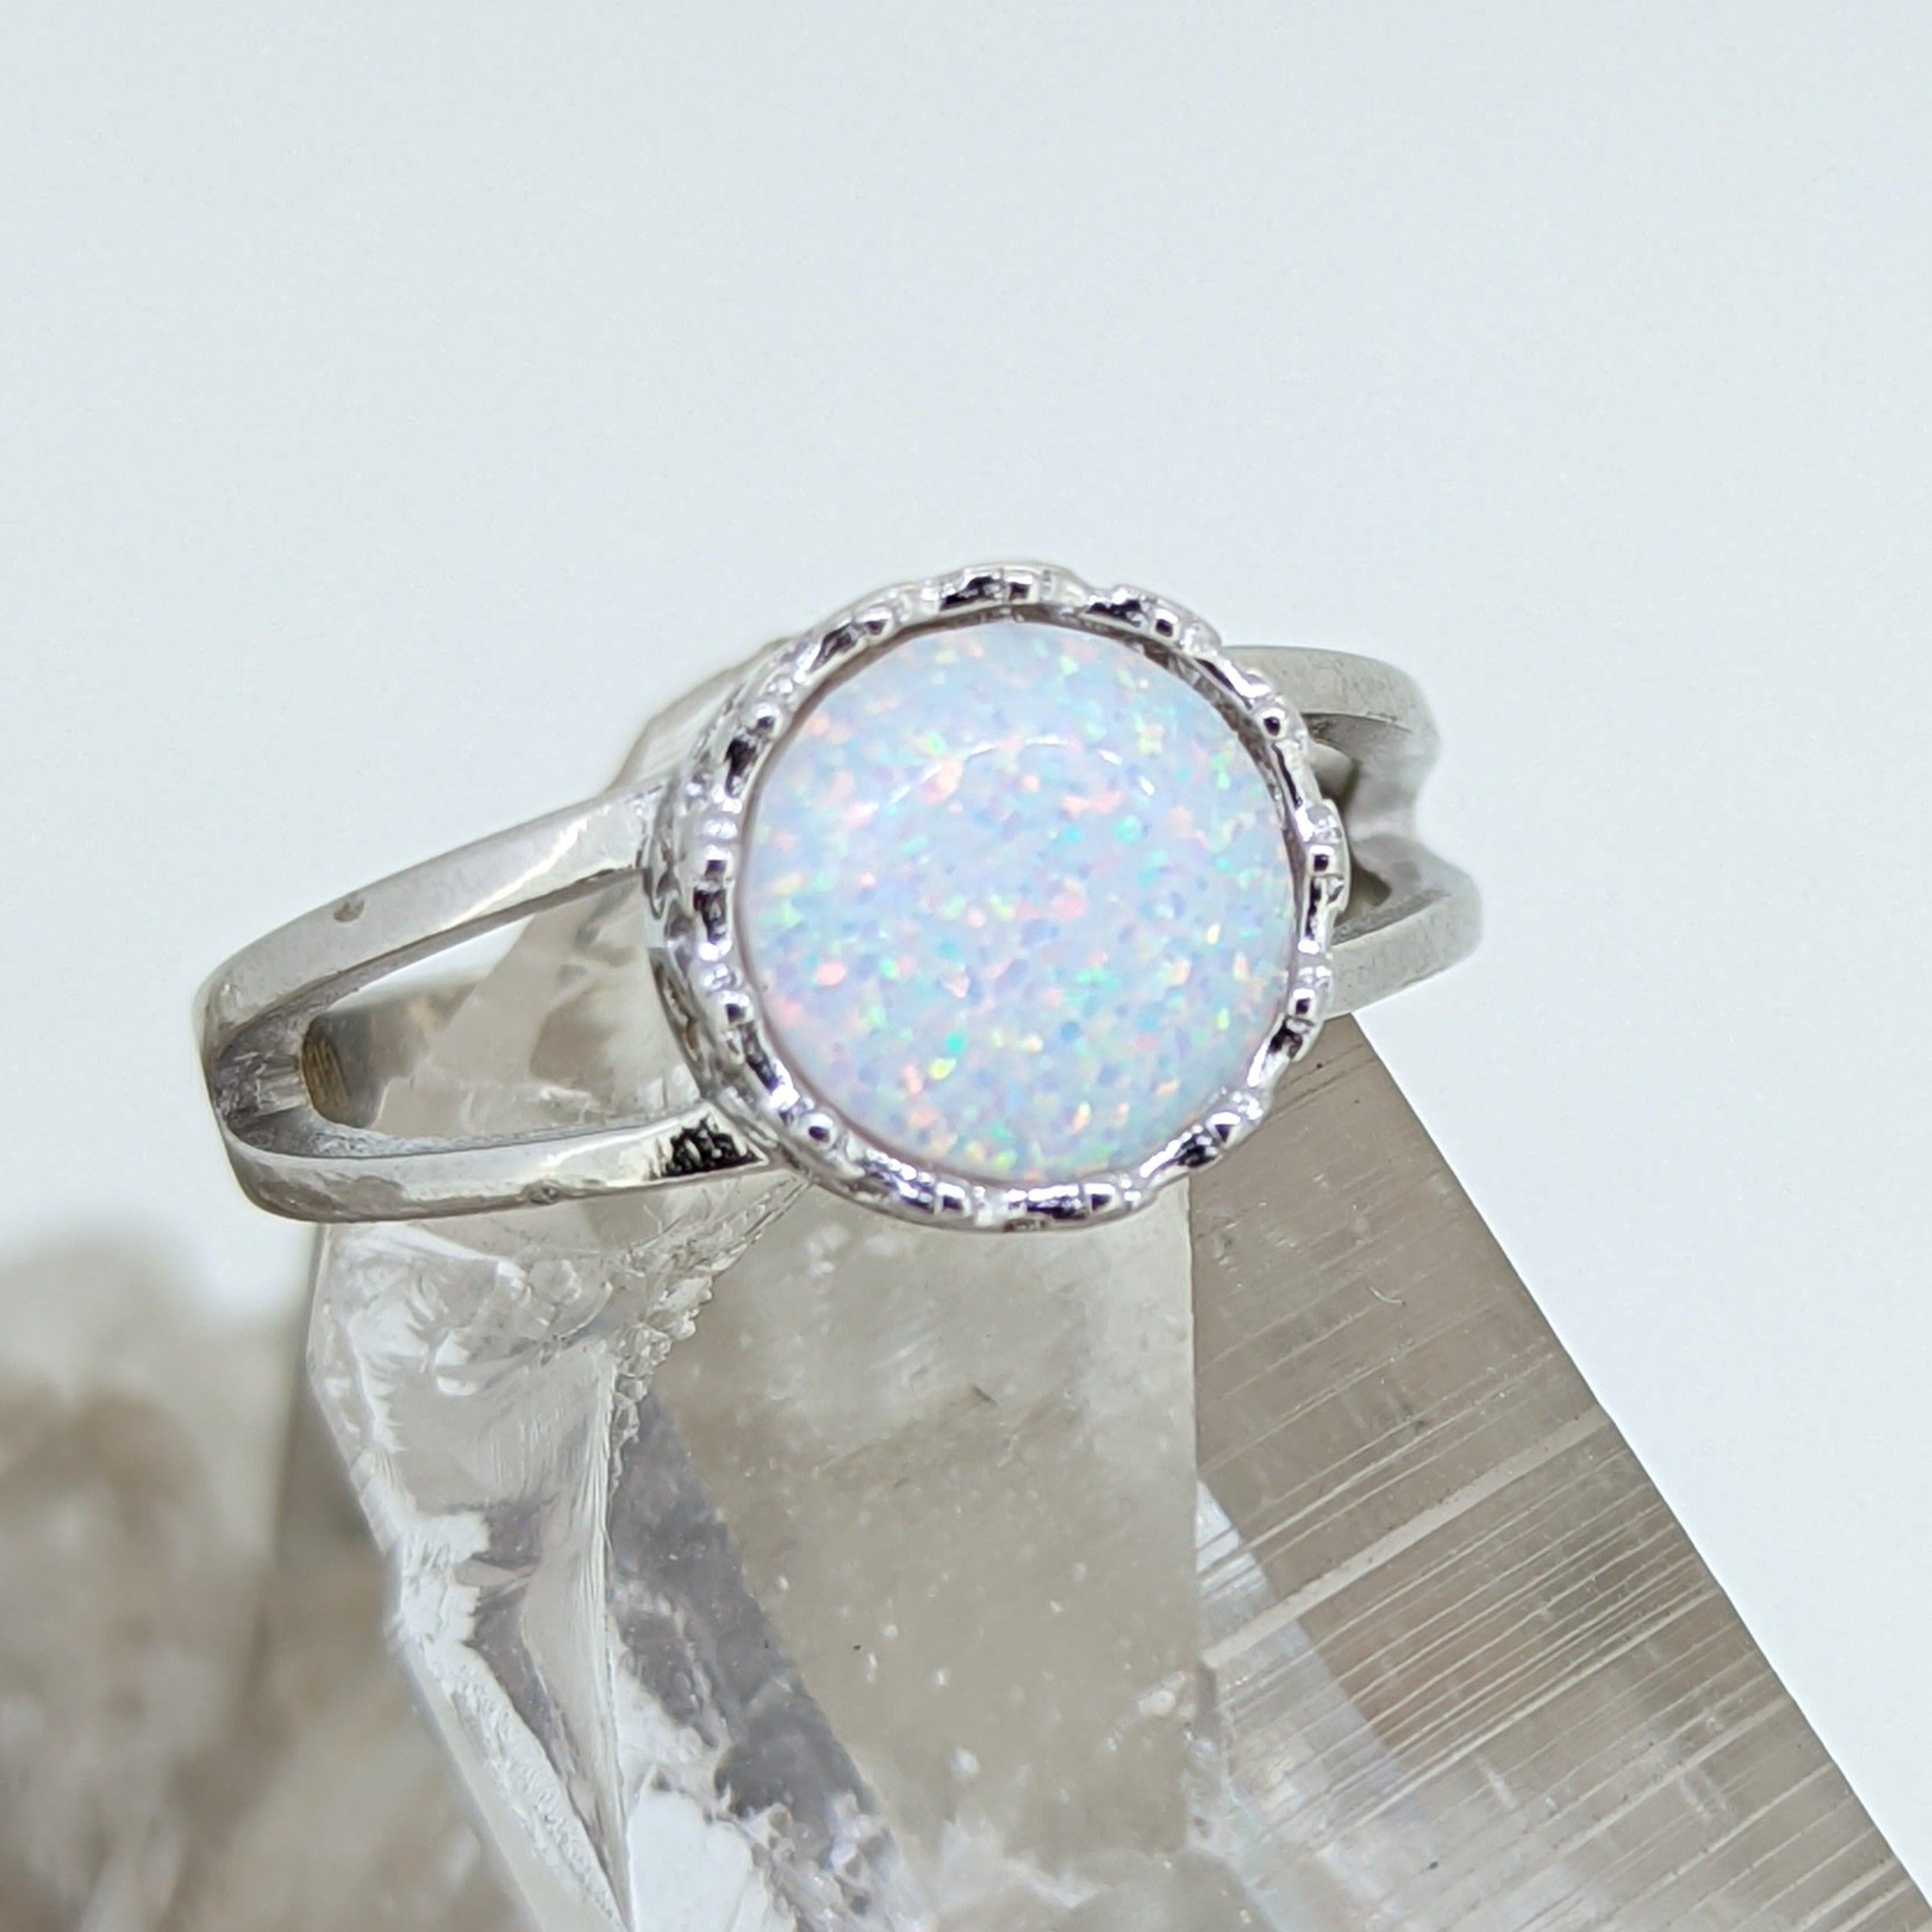 4 Pieces 4mm Black Opal Silver Ring Classic 925 Silver Opal Jewelry 100%  Natural Opal Ring for Daily Wear - AliExpress